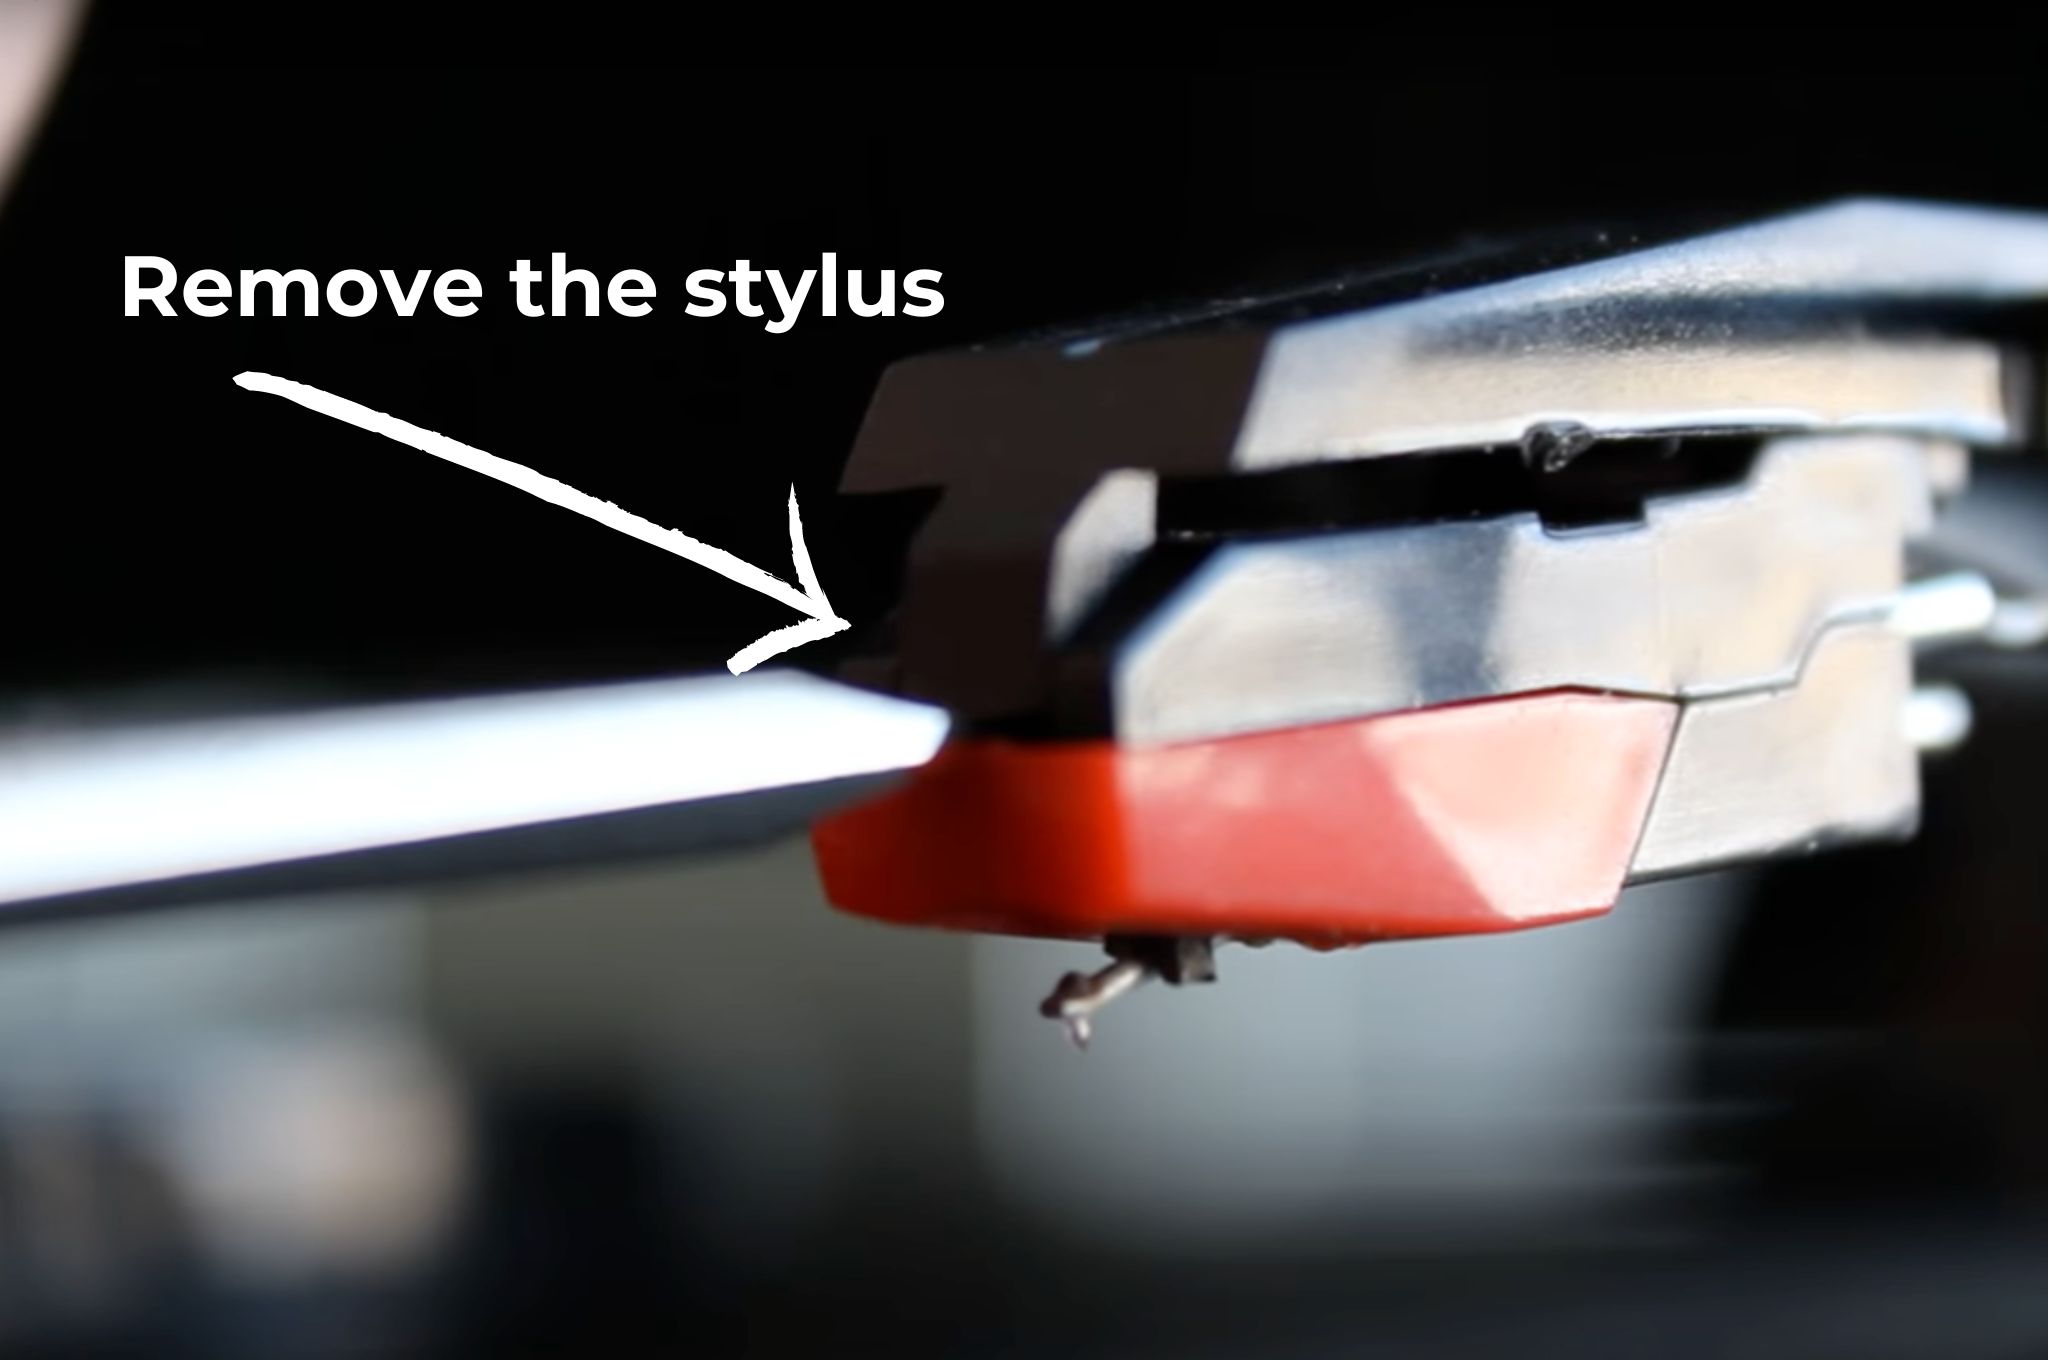 Removing the old stylus from a record player's headshell